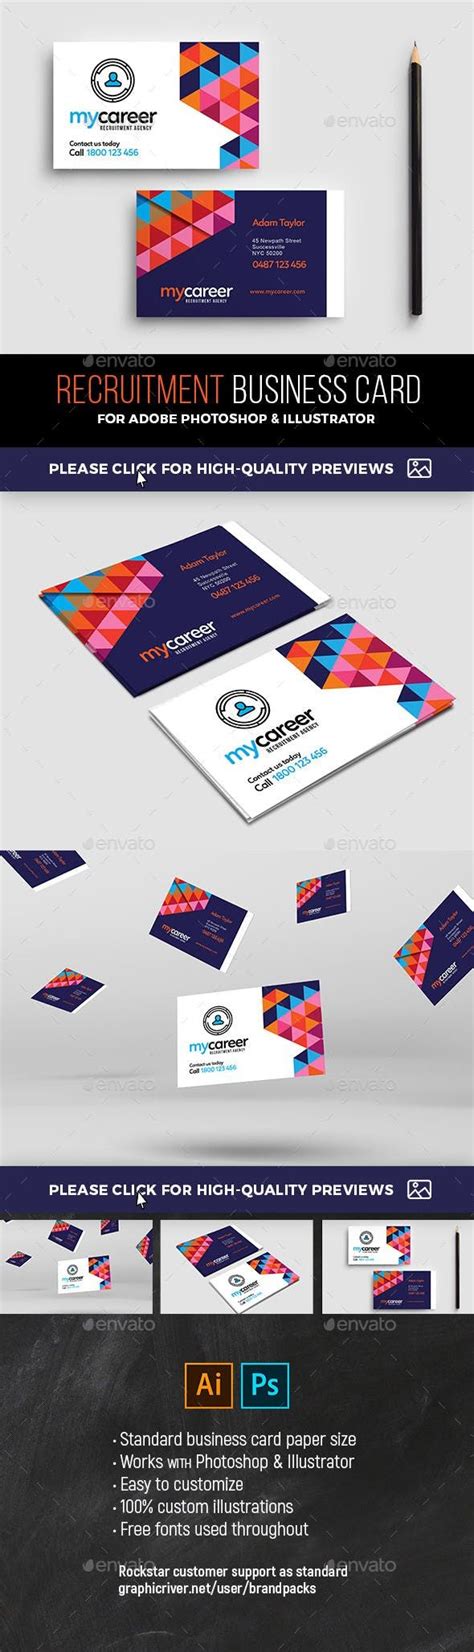 Recruitment Agency Business Card Template By Brandpacks Graphicriver